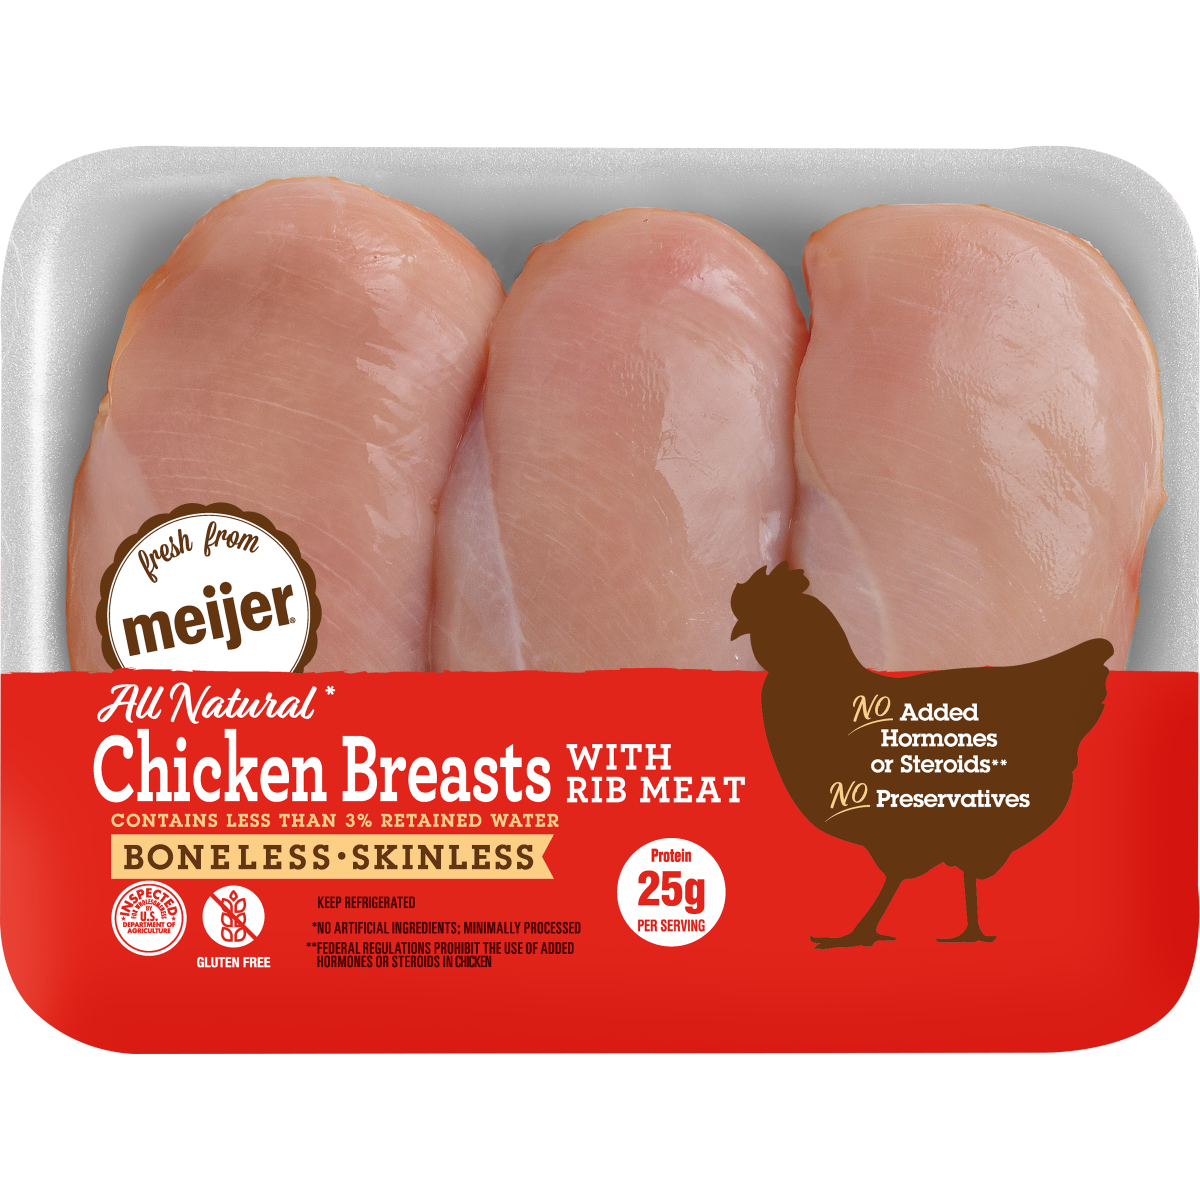 slide 1 of 9, FRESH FROM MEIJER Meijer 100% All Natural Boneless Skinless Chicken Breasts with Rib Meat, per lb